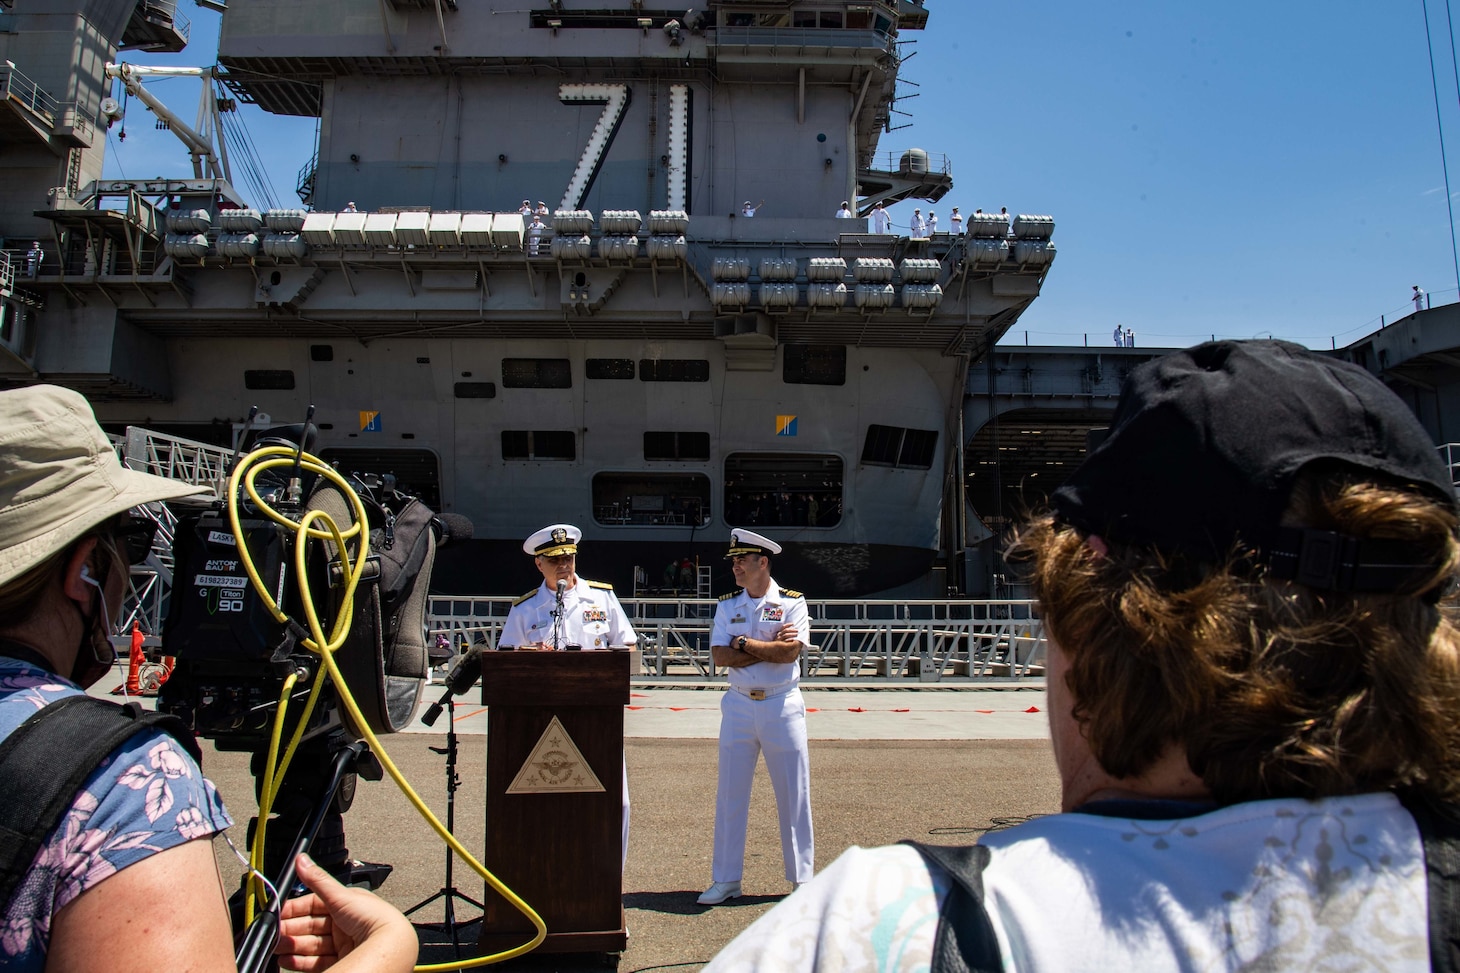 Rear Adm. Doug Verissimo, Commander, Carrier Strike Group 9, left, and Capt. Eric Anduze, commanding officer of the aircraft carrier USS Theodore Roosevelt (CVN 71), deliver remarks during a press briefing.